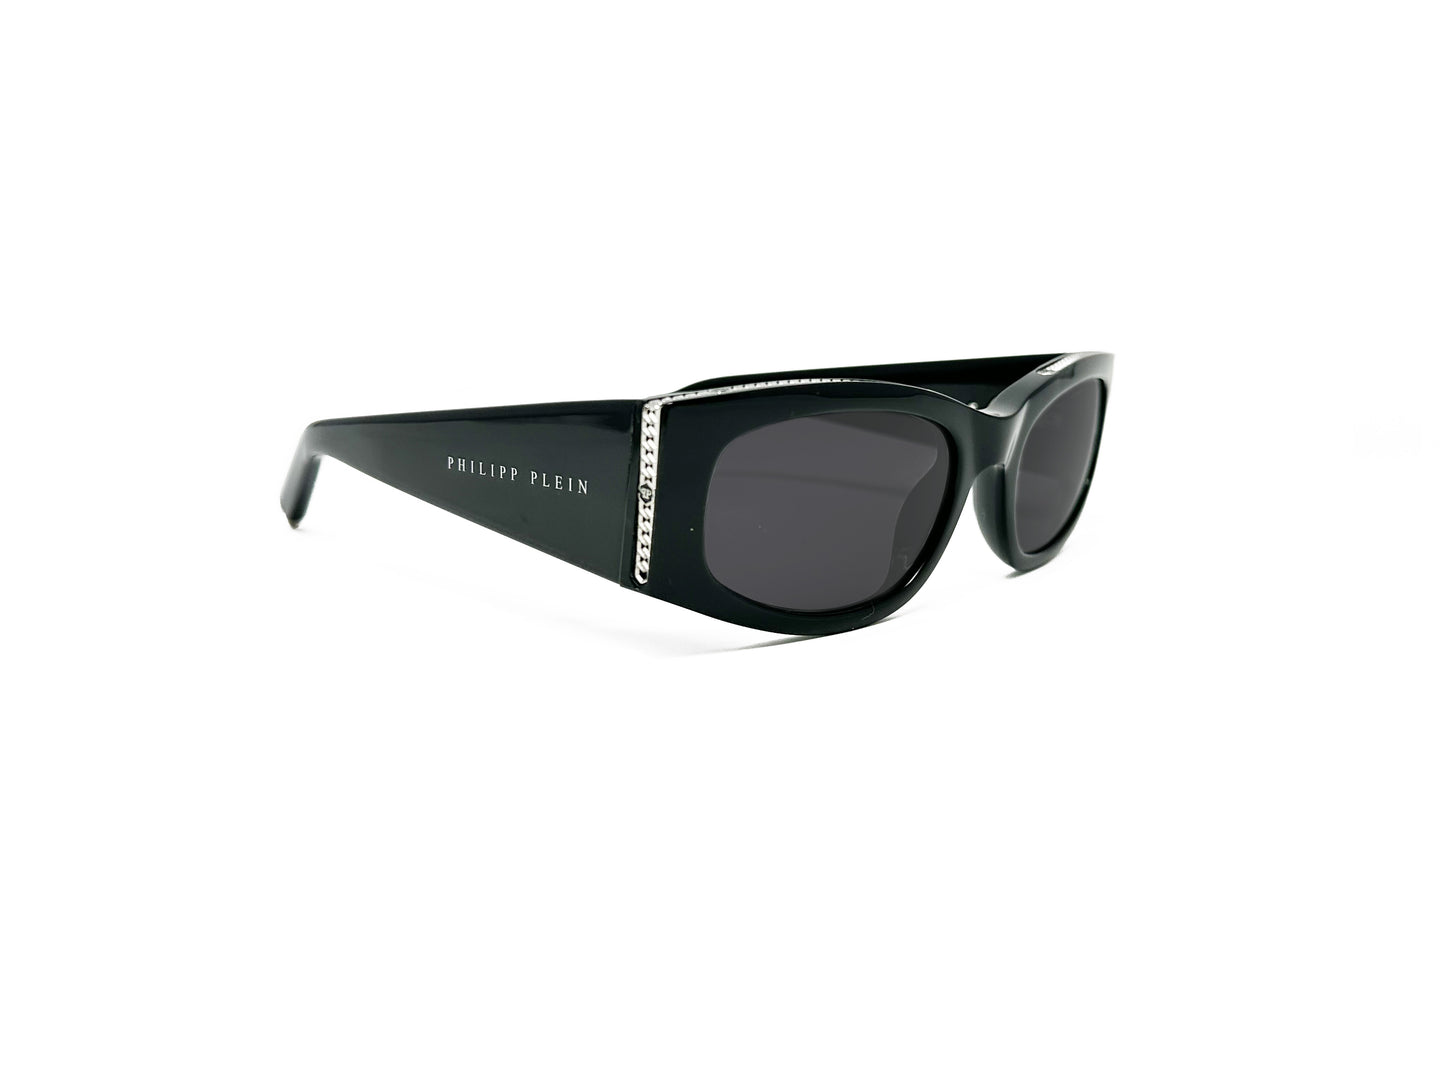 Philipp Plein curved, rectangular, acetate sunglass with an upswept lift and straight sides. Model: Nobile Rome. Color: 0700 Black. Side view.